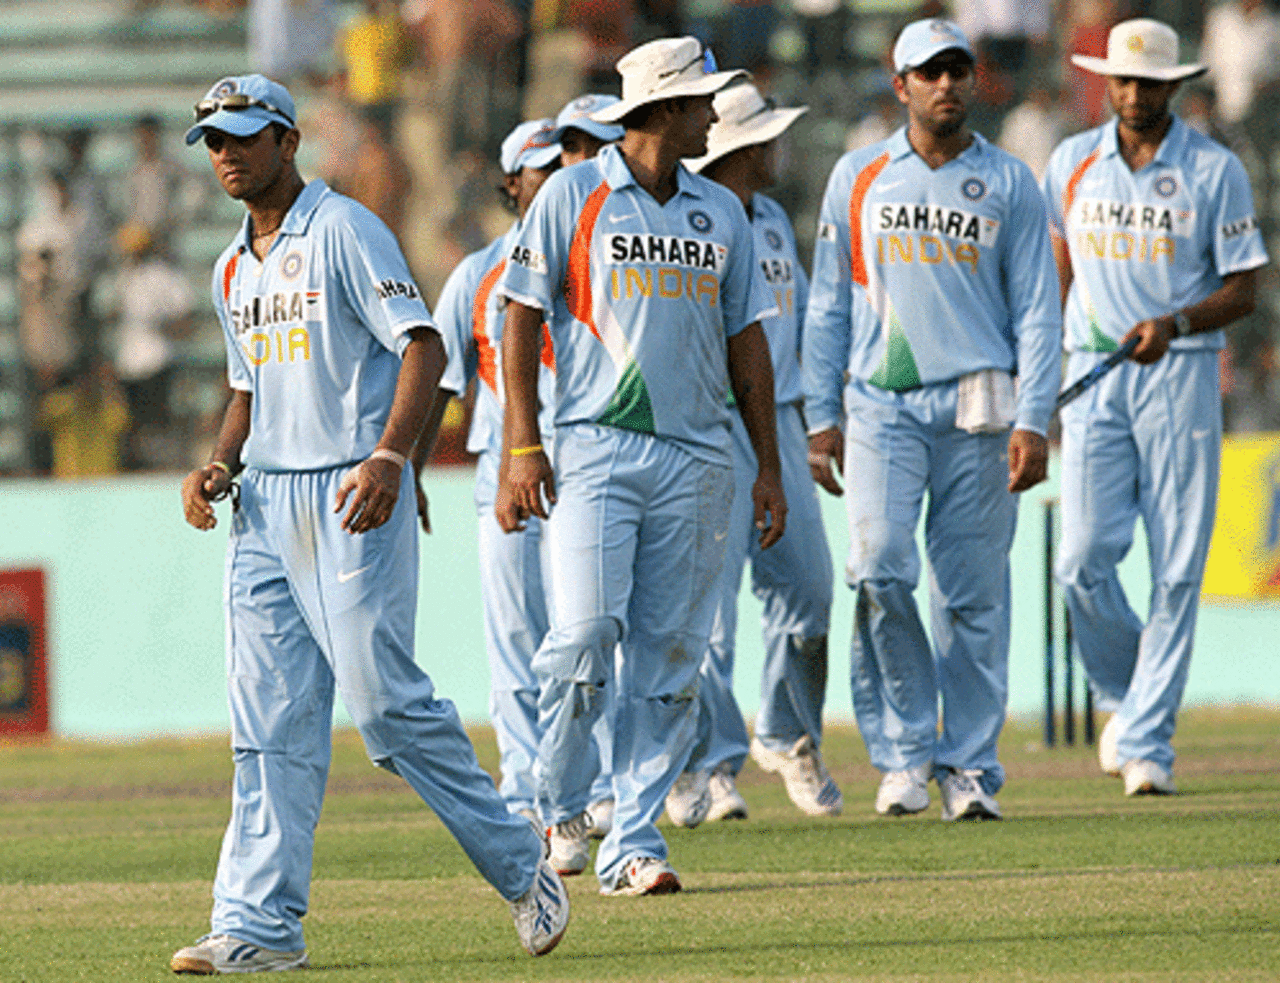 Rahul Dravid leads his side off the field after their win, Bangladesh v India, 2nd ODI, Mirpur, may 12, 2007